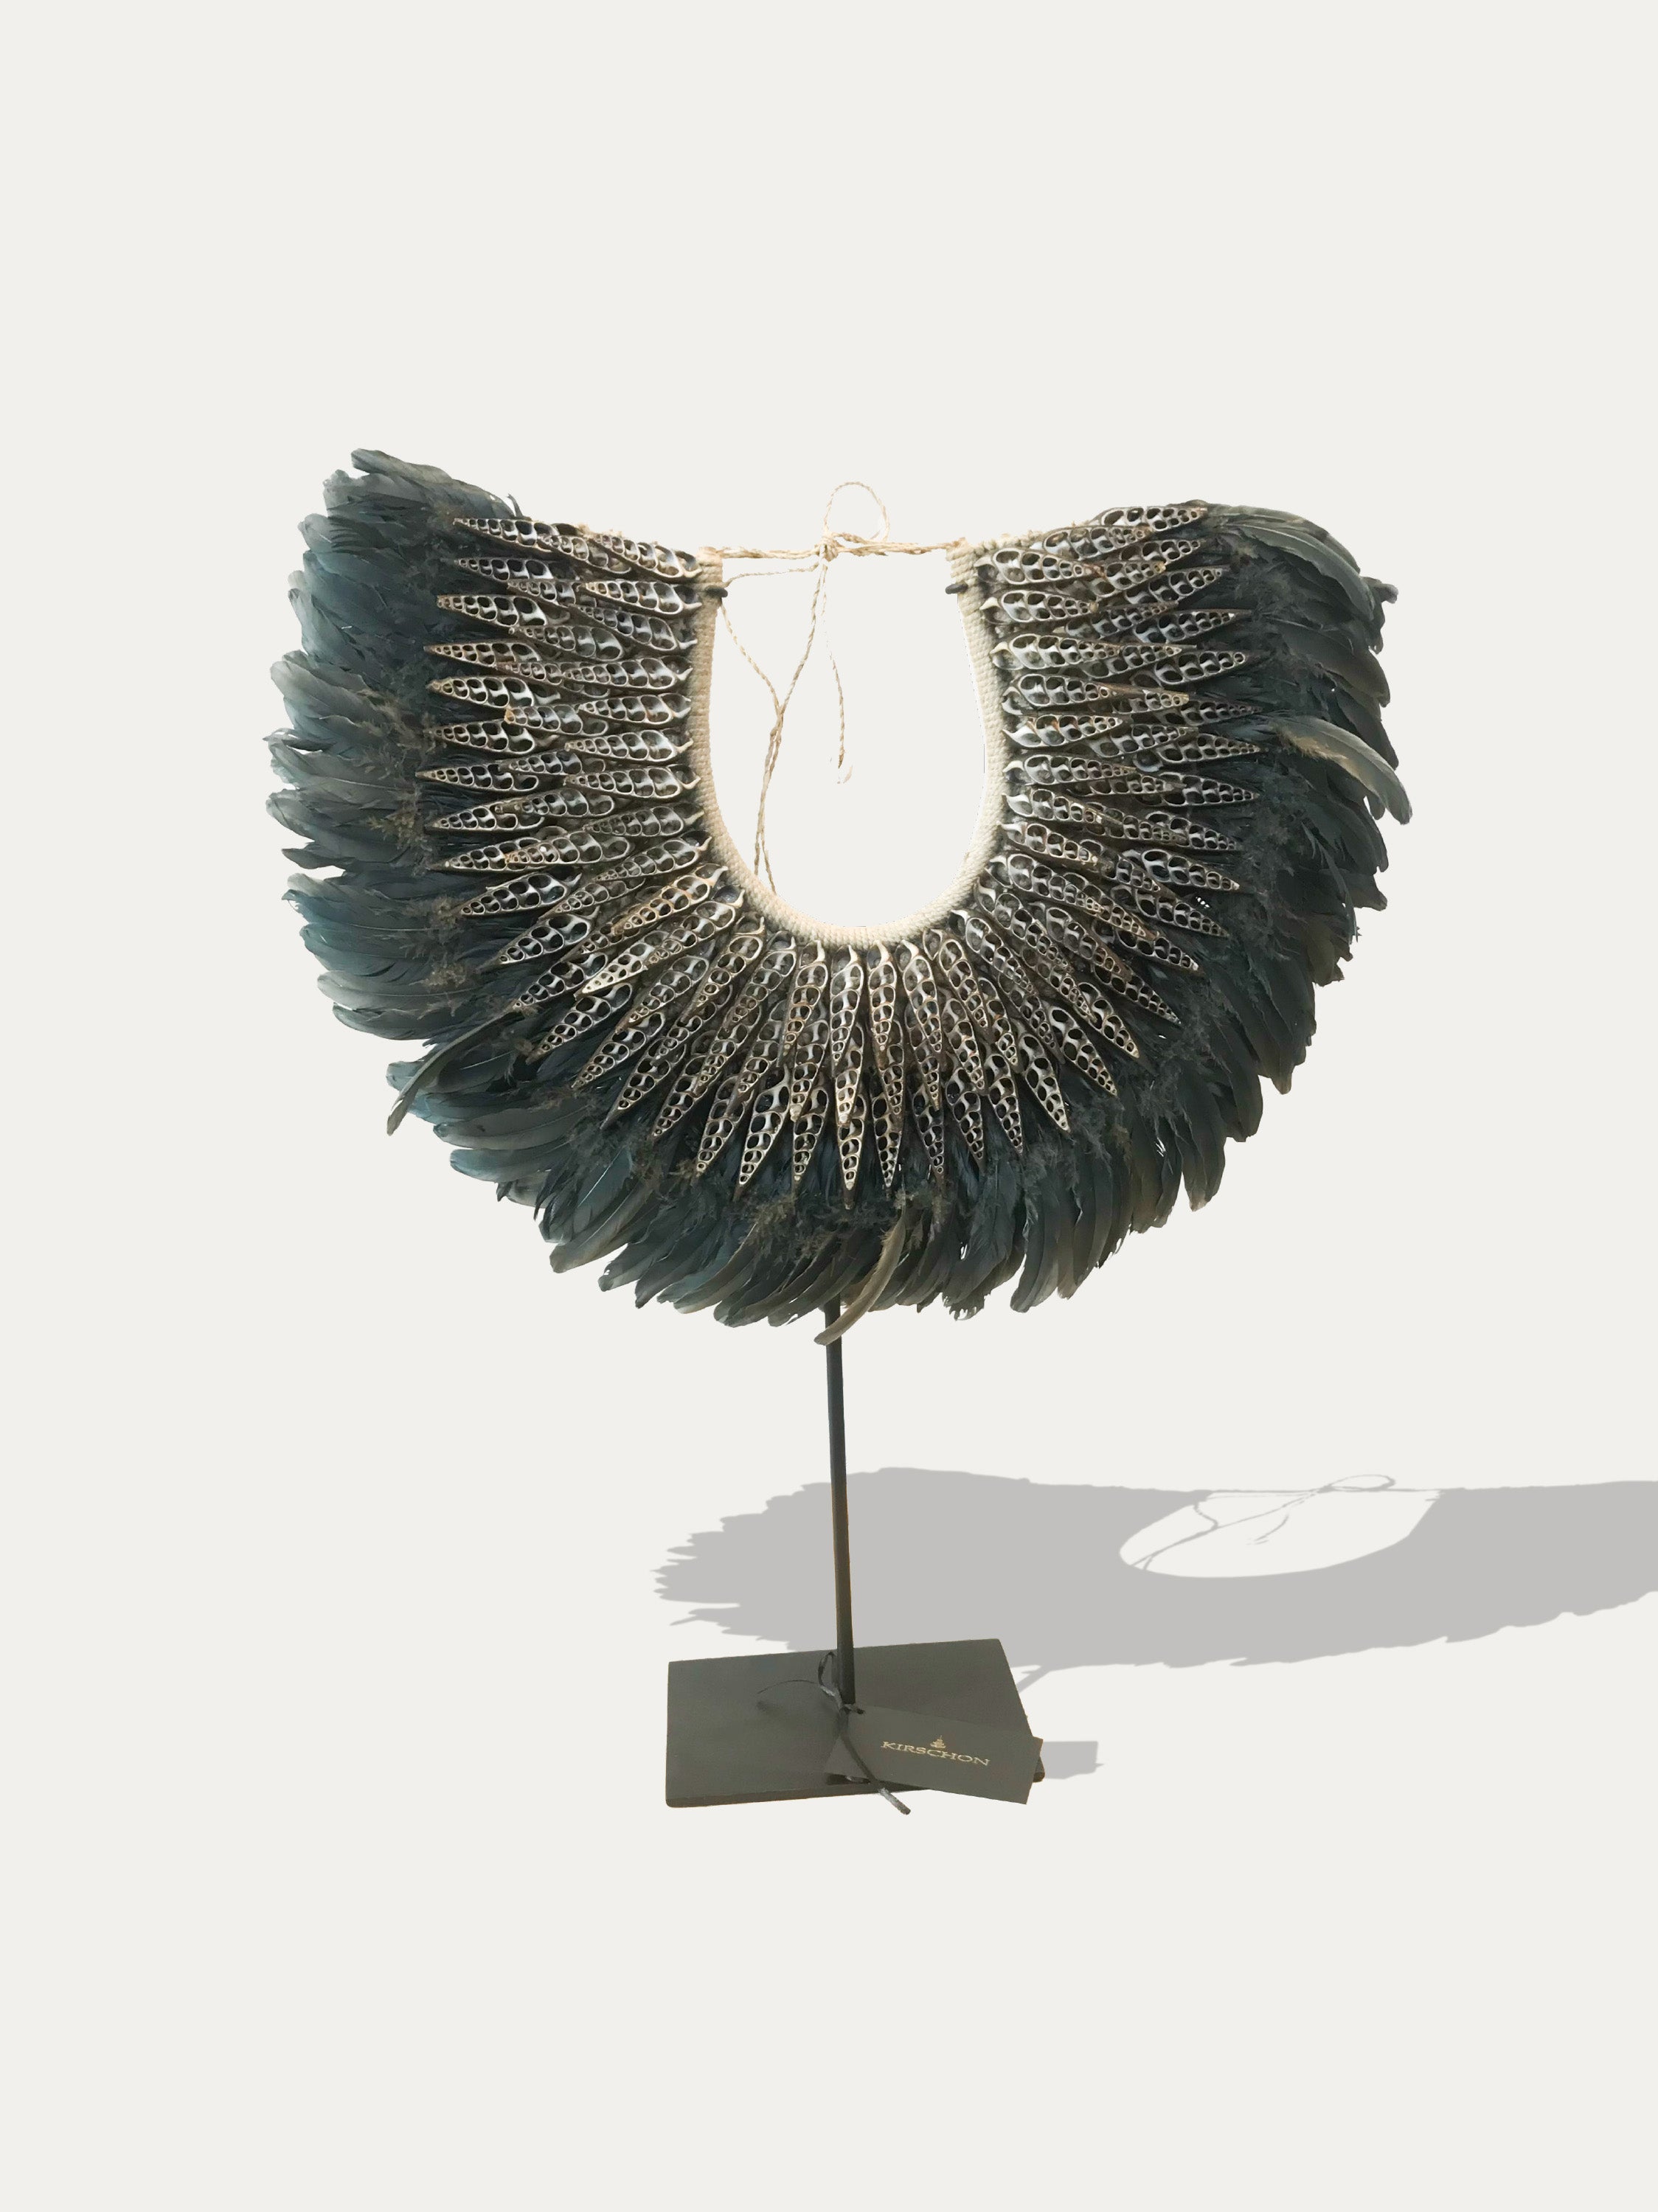 Set of 2 spiral shell and feather necklaces from Papua - Asian Art from Kirschon